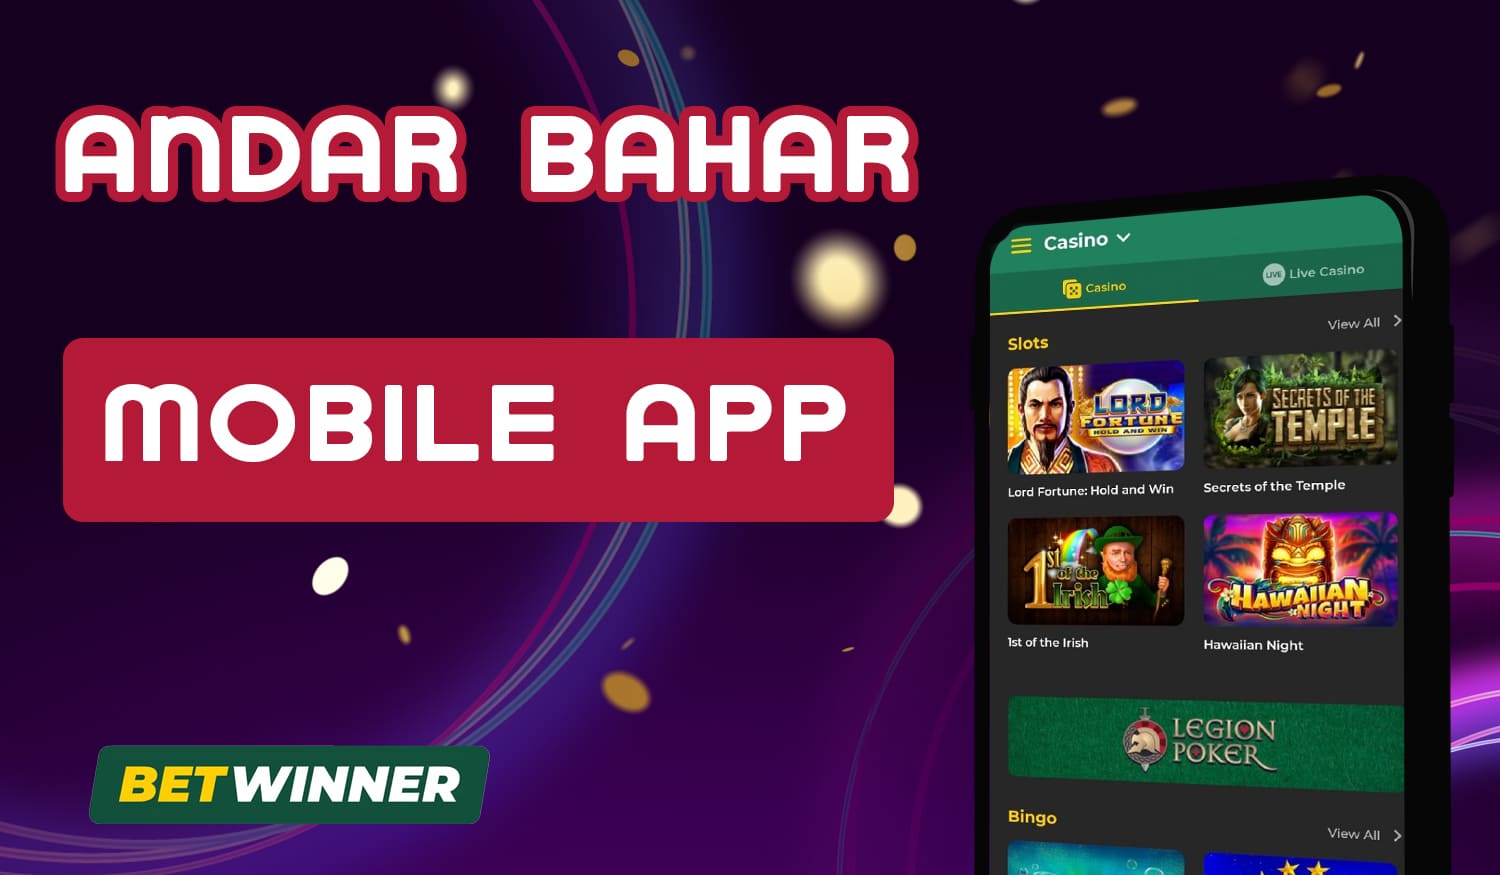 How to start playing Andar Bahar at BetWinner using the mobile app